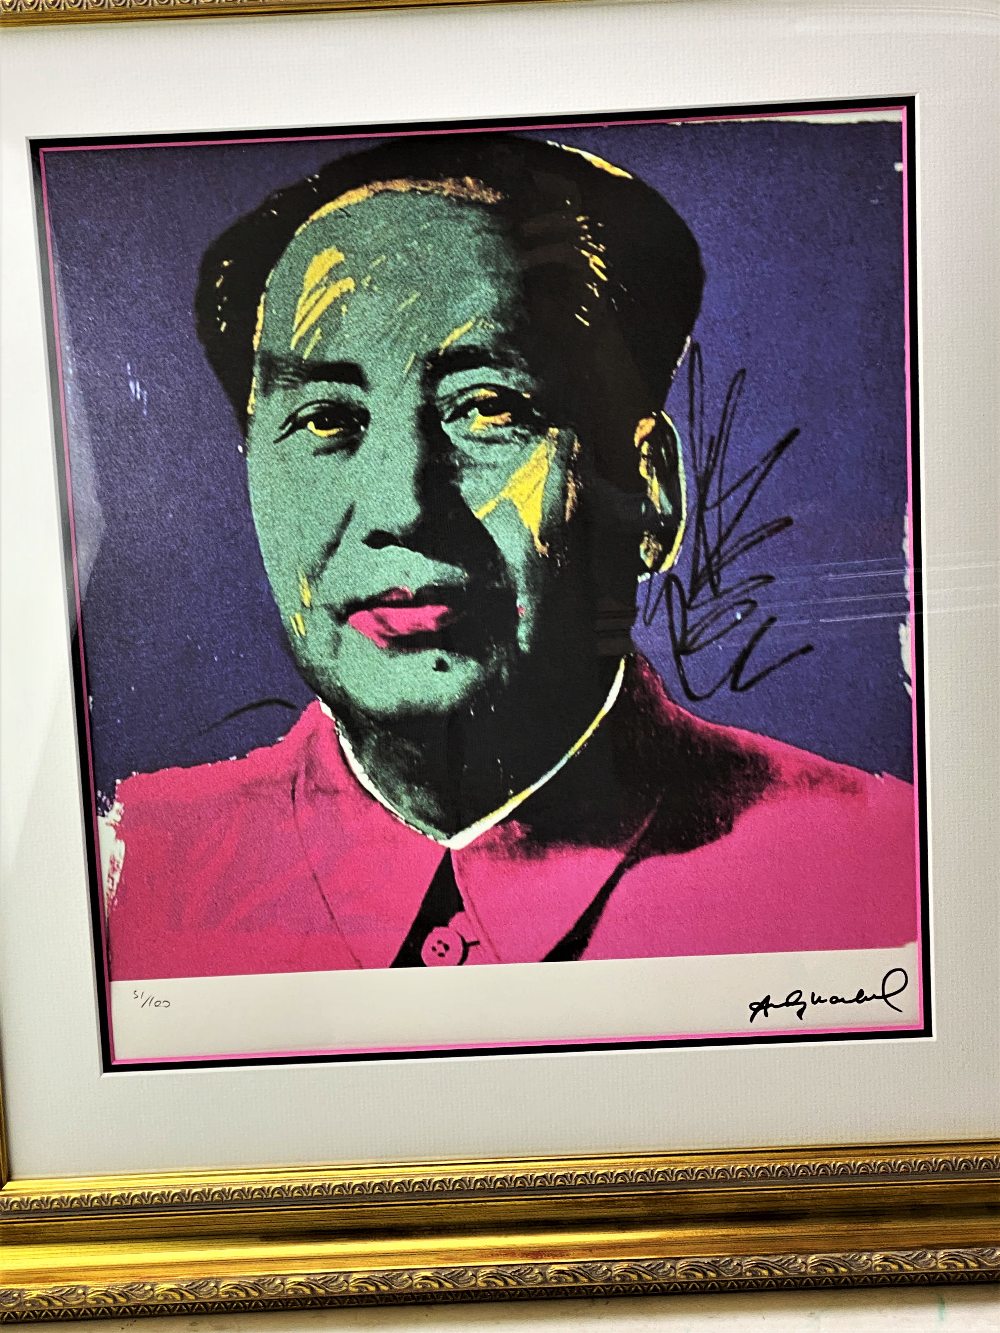 Andy Warhol (1928-1987) “Mao Tse Tung” Numbered Lithograph 51/100, Ornate Framed. - Image 2 of 3